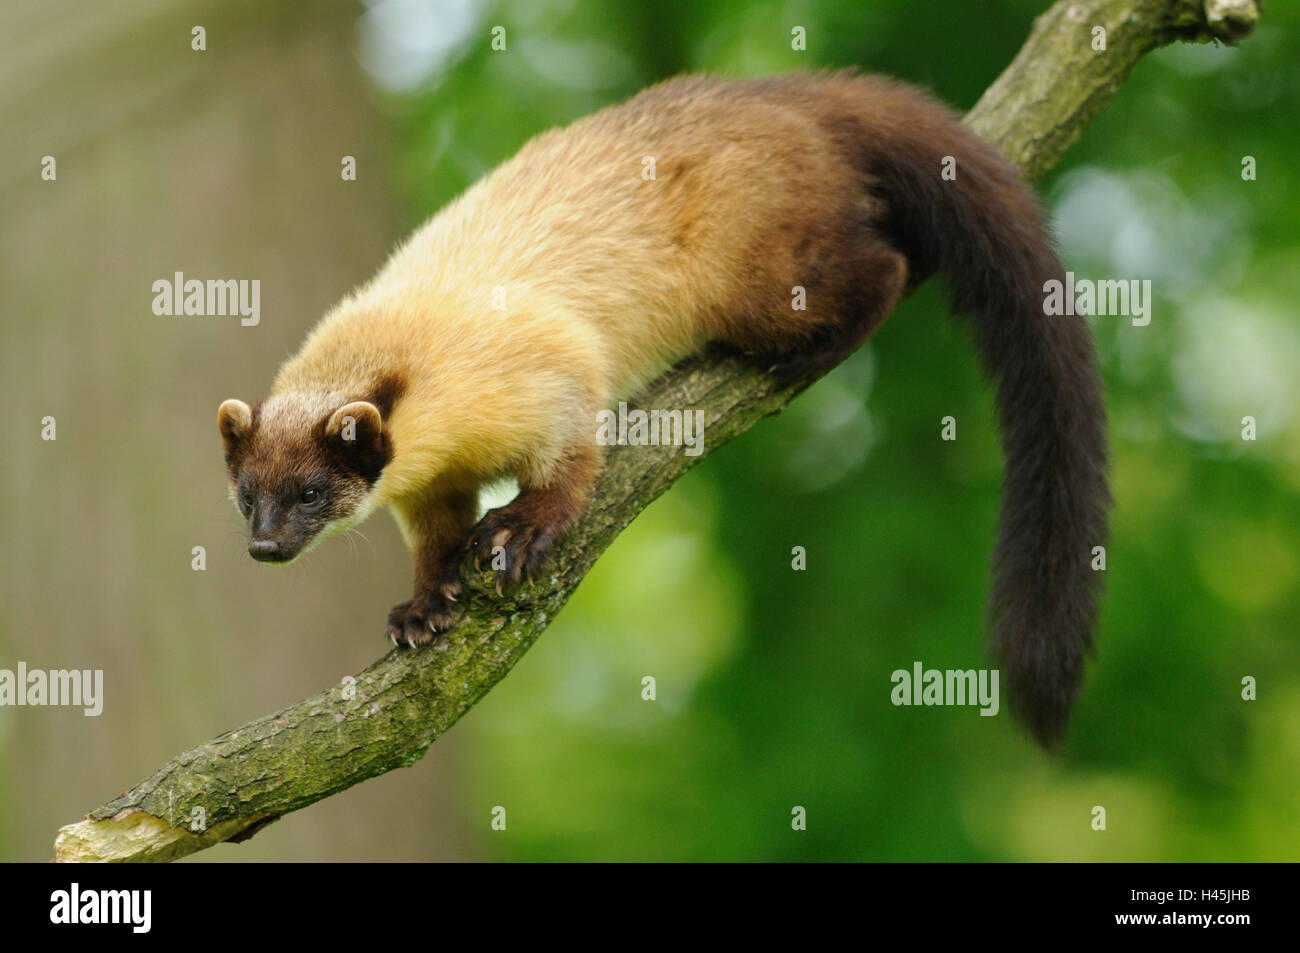 Yellow-throated marten, Martes flavigula, branch, side view, standing, Stock Photo